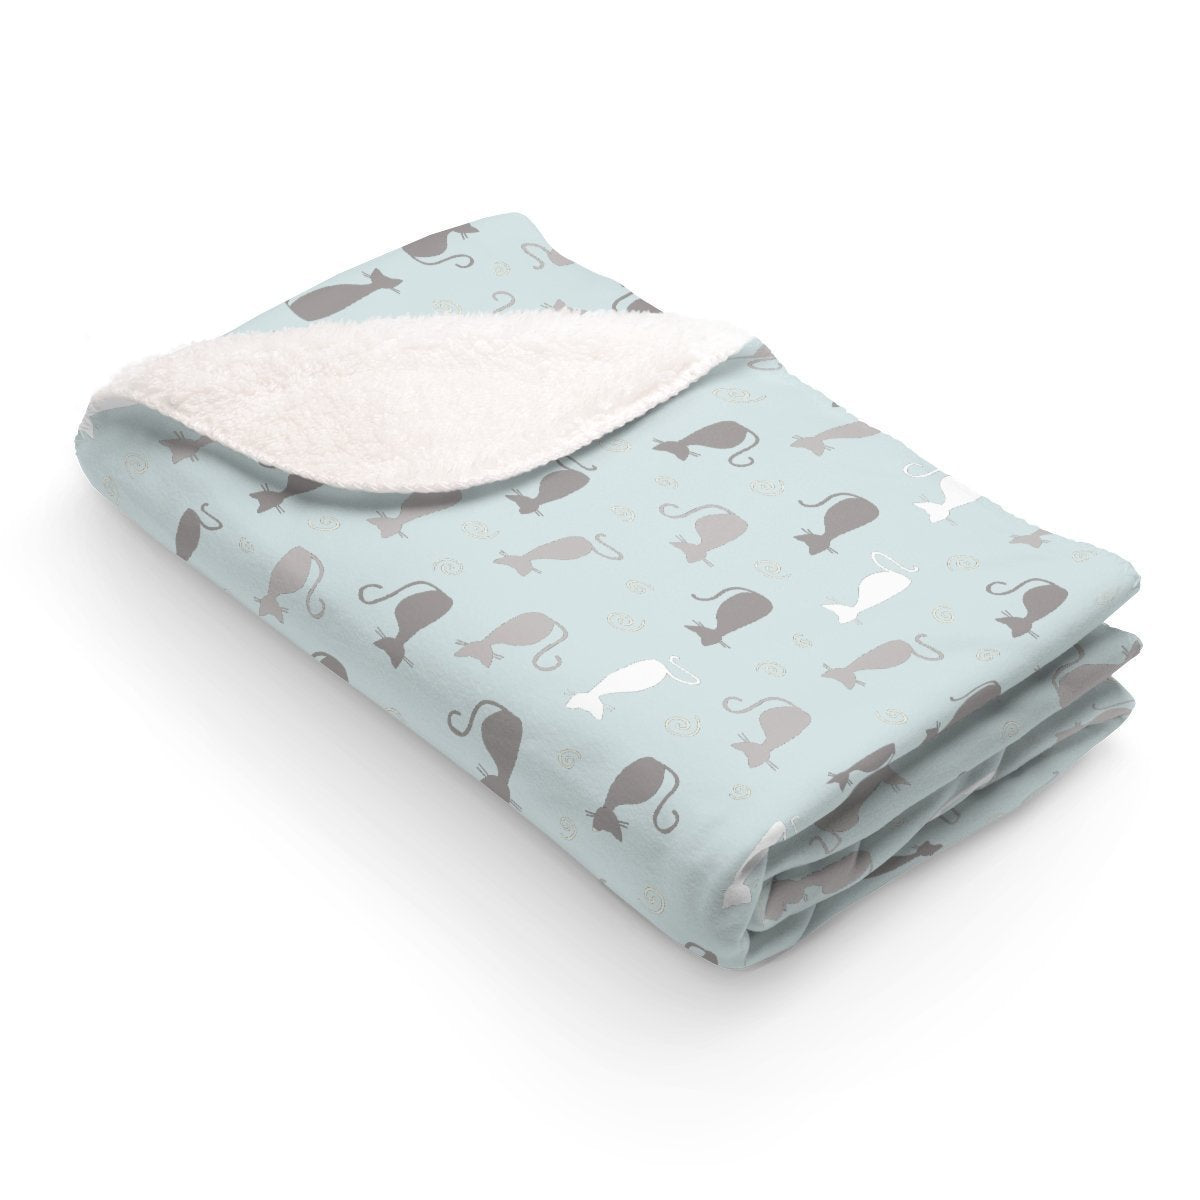 Stay cozy all year round snuggled in this unique cat blanket featuring cats in light gray, white, and blue.